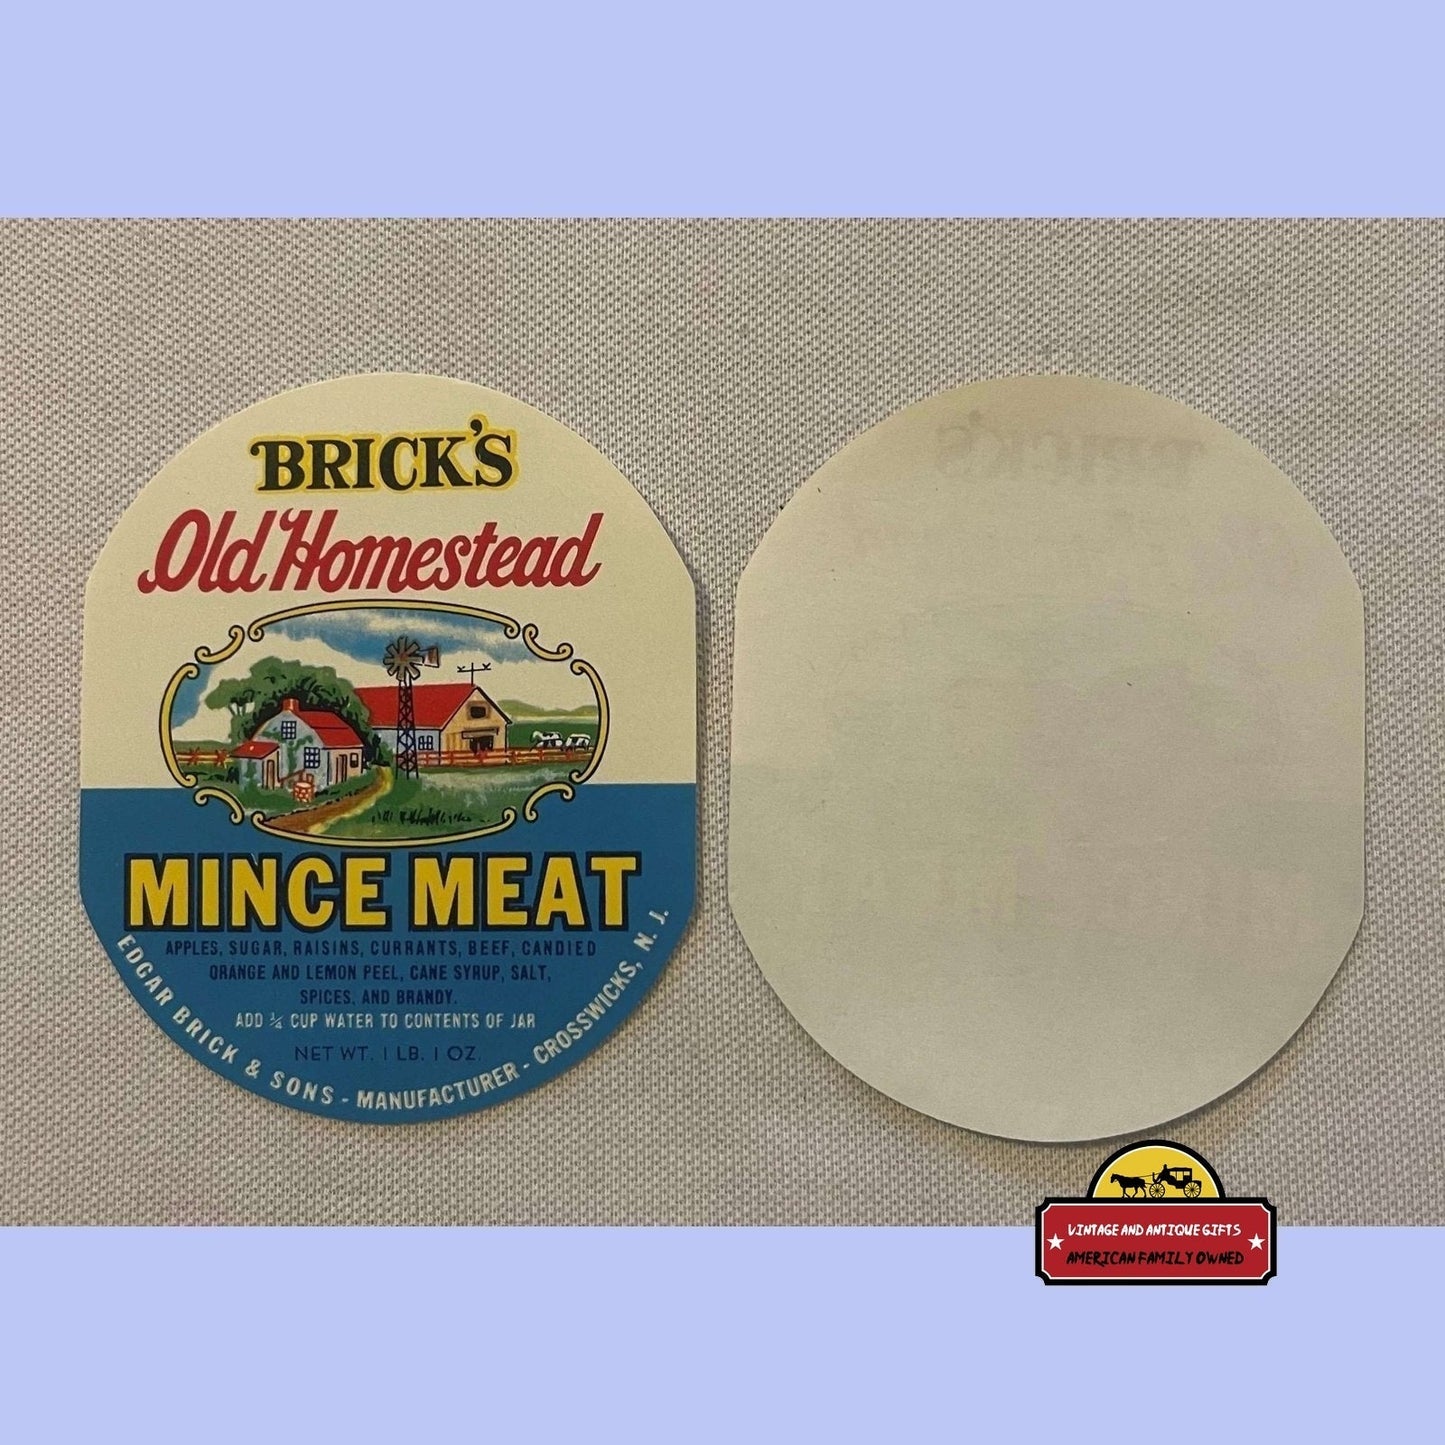 Rare Antique Vintage 1910s - 1930s Old Homestead Mince Meat Label Advertisements - Exquisite 1910s-30s Lithography!